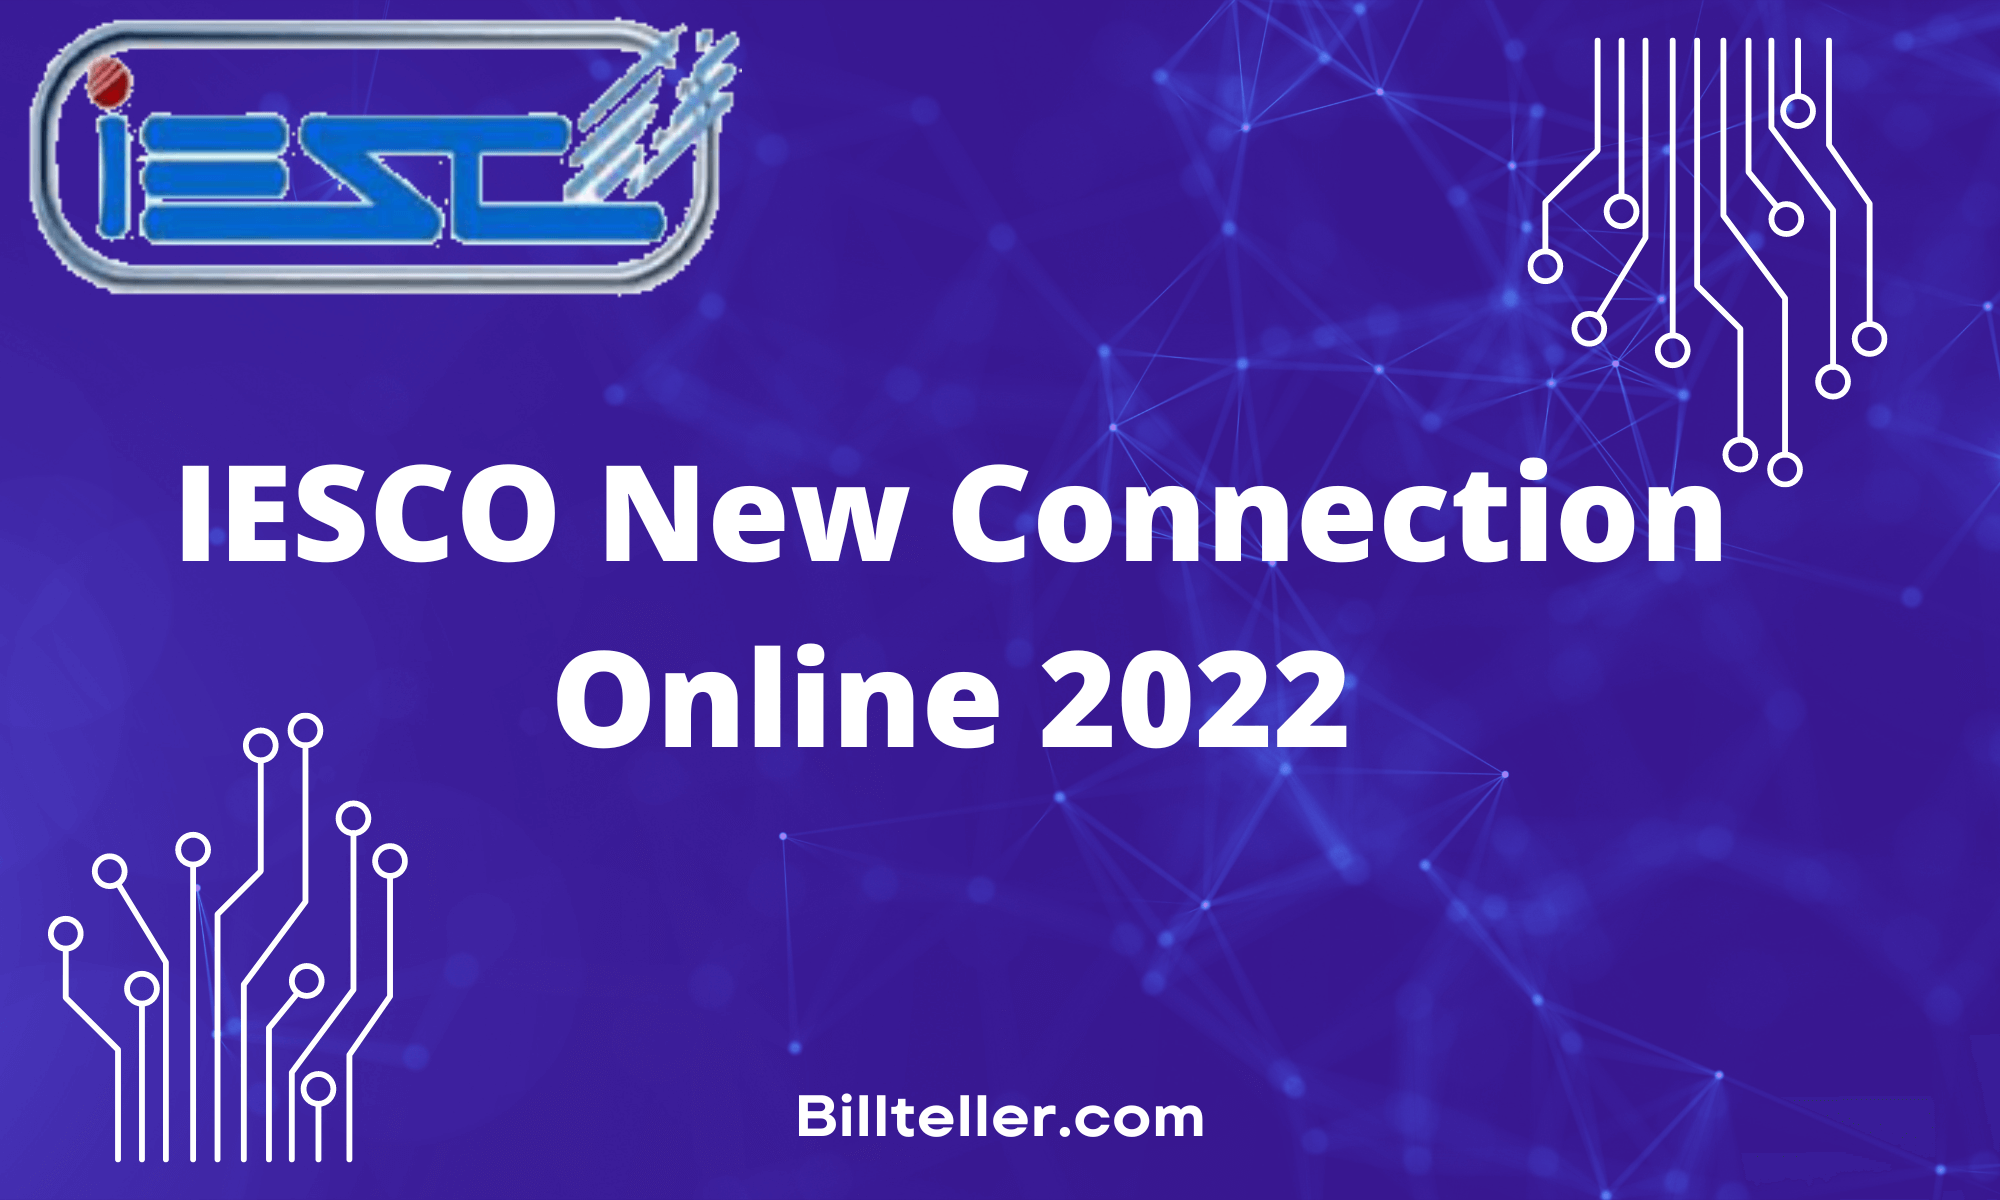 IESCO New Connection Online 2022